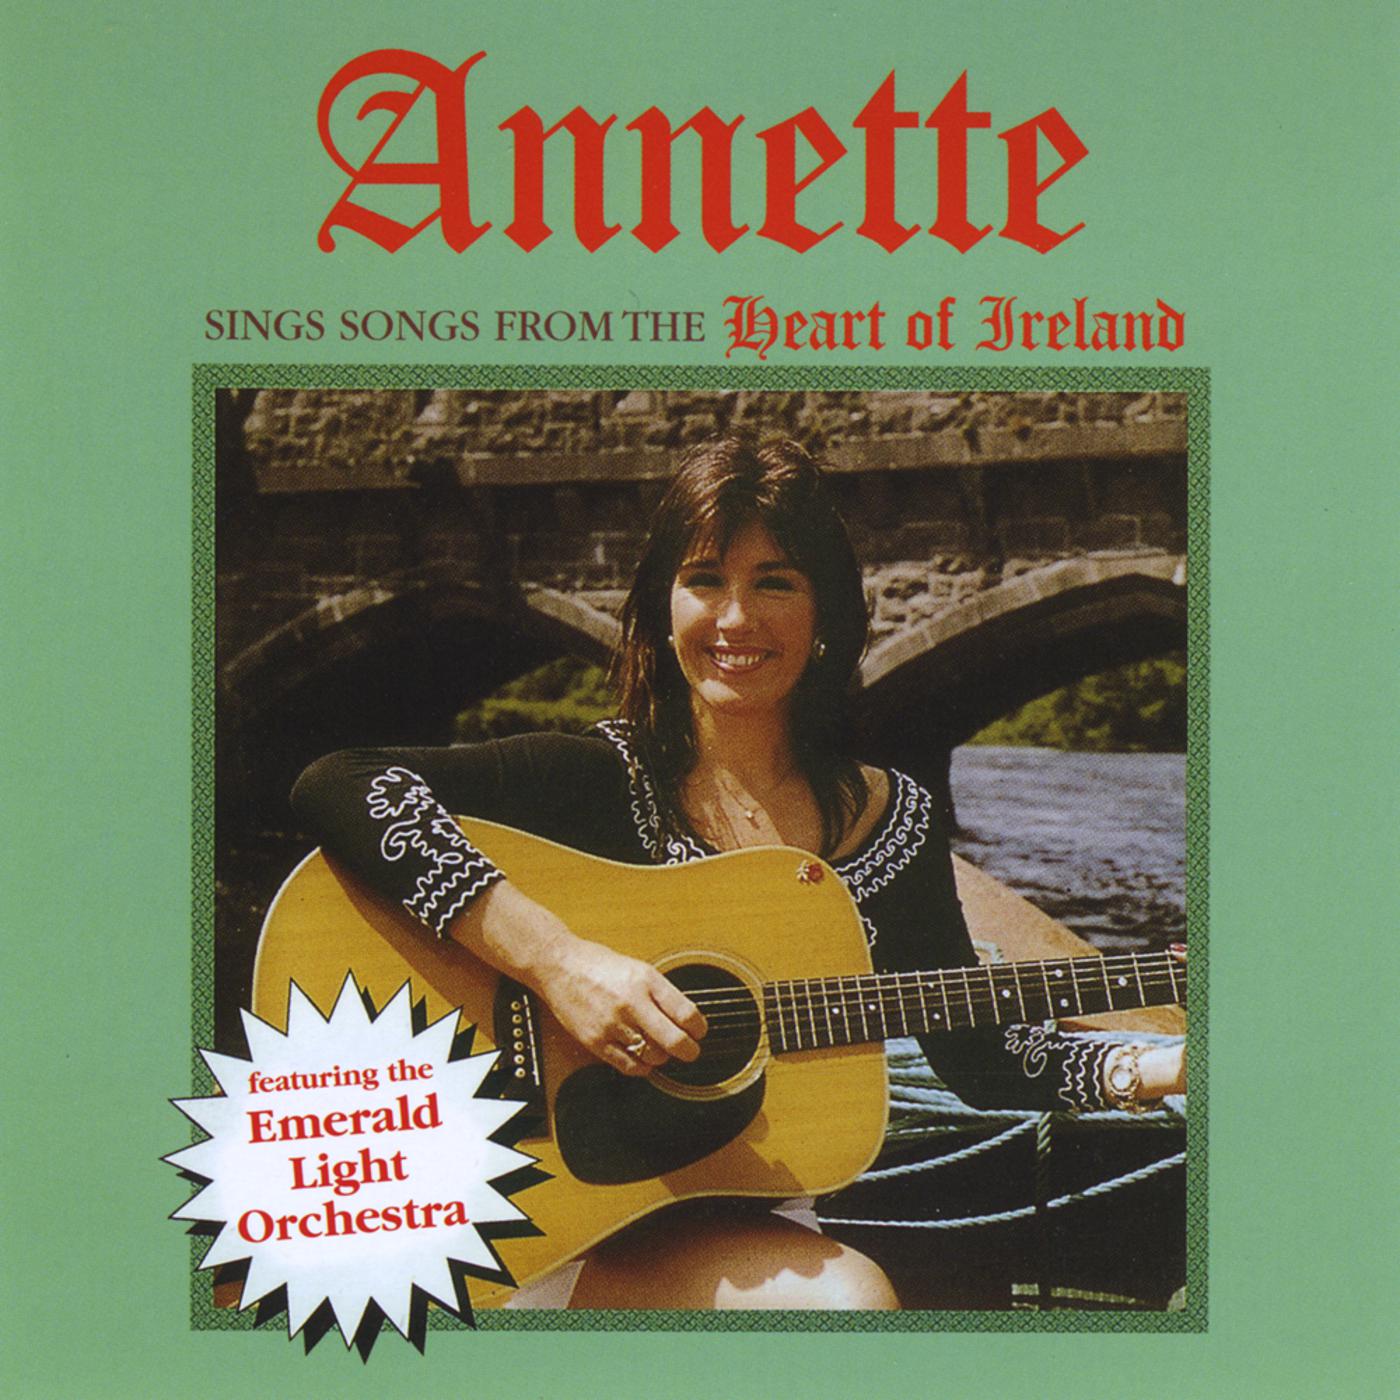 Annette Sings Songs From The Heart of Ireland